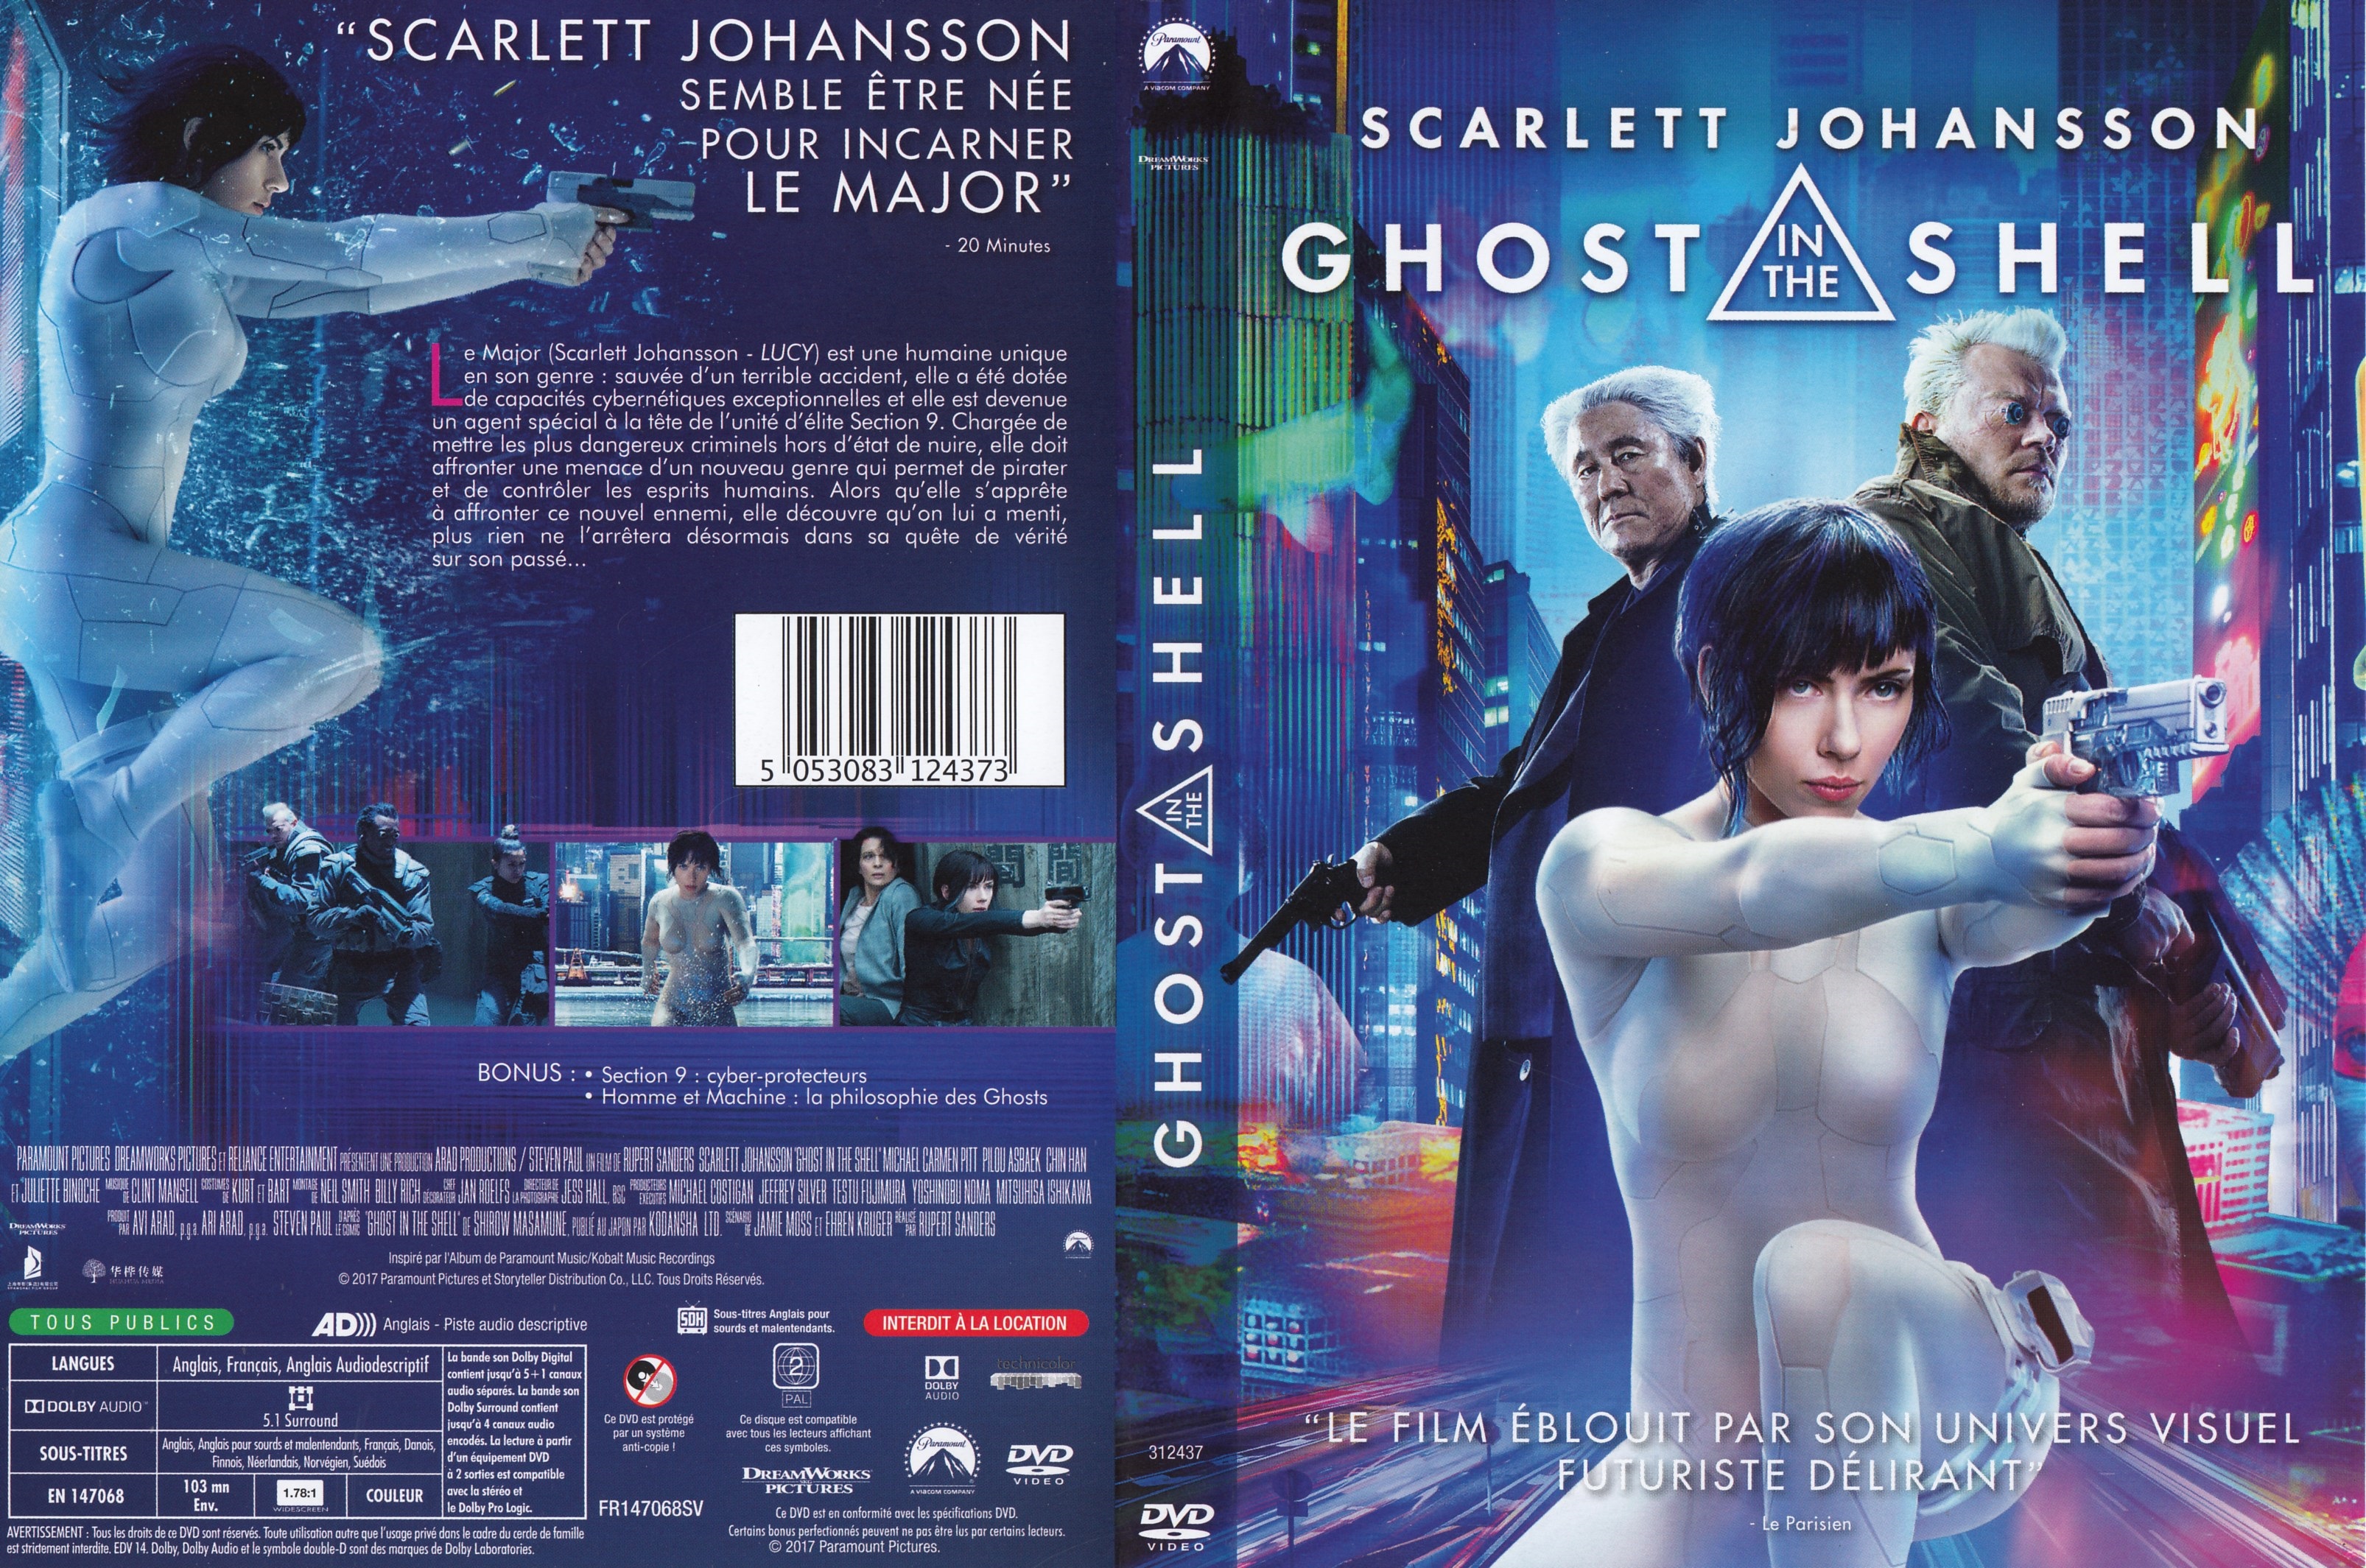 Jaquette DVD Ghost in the Shell (FILM)